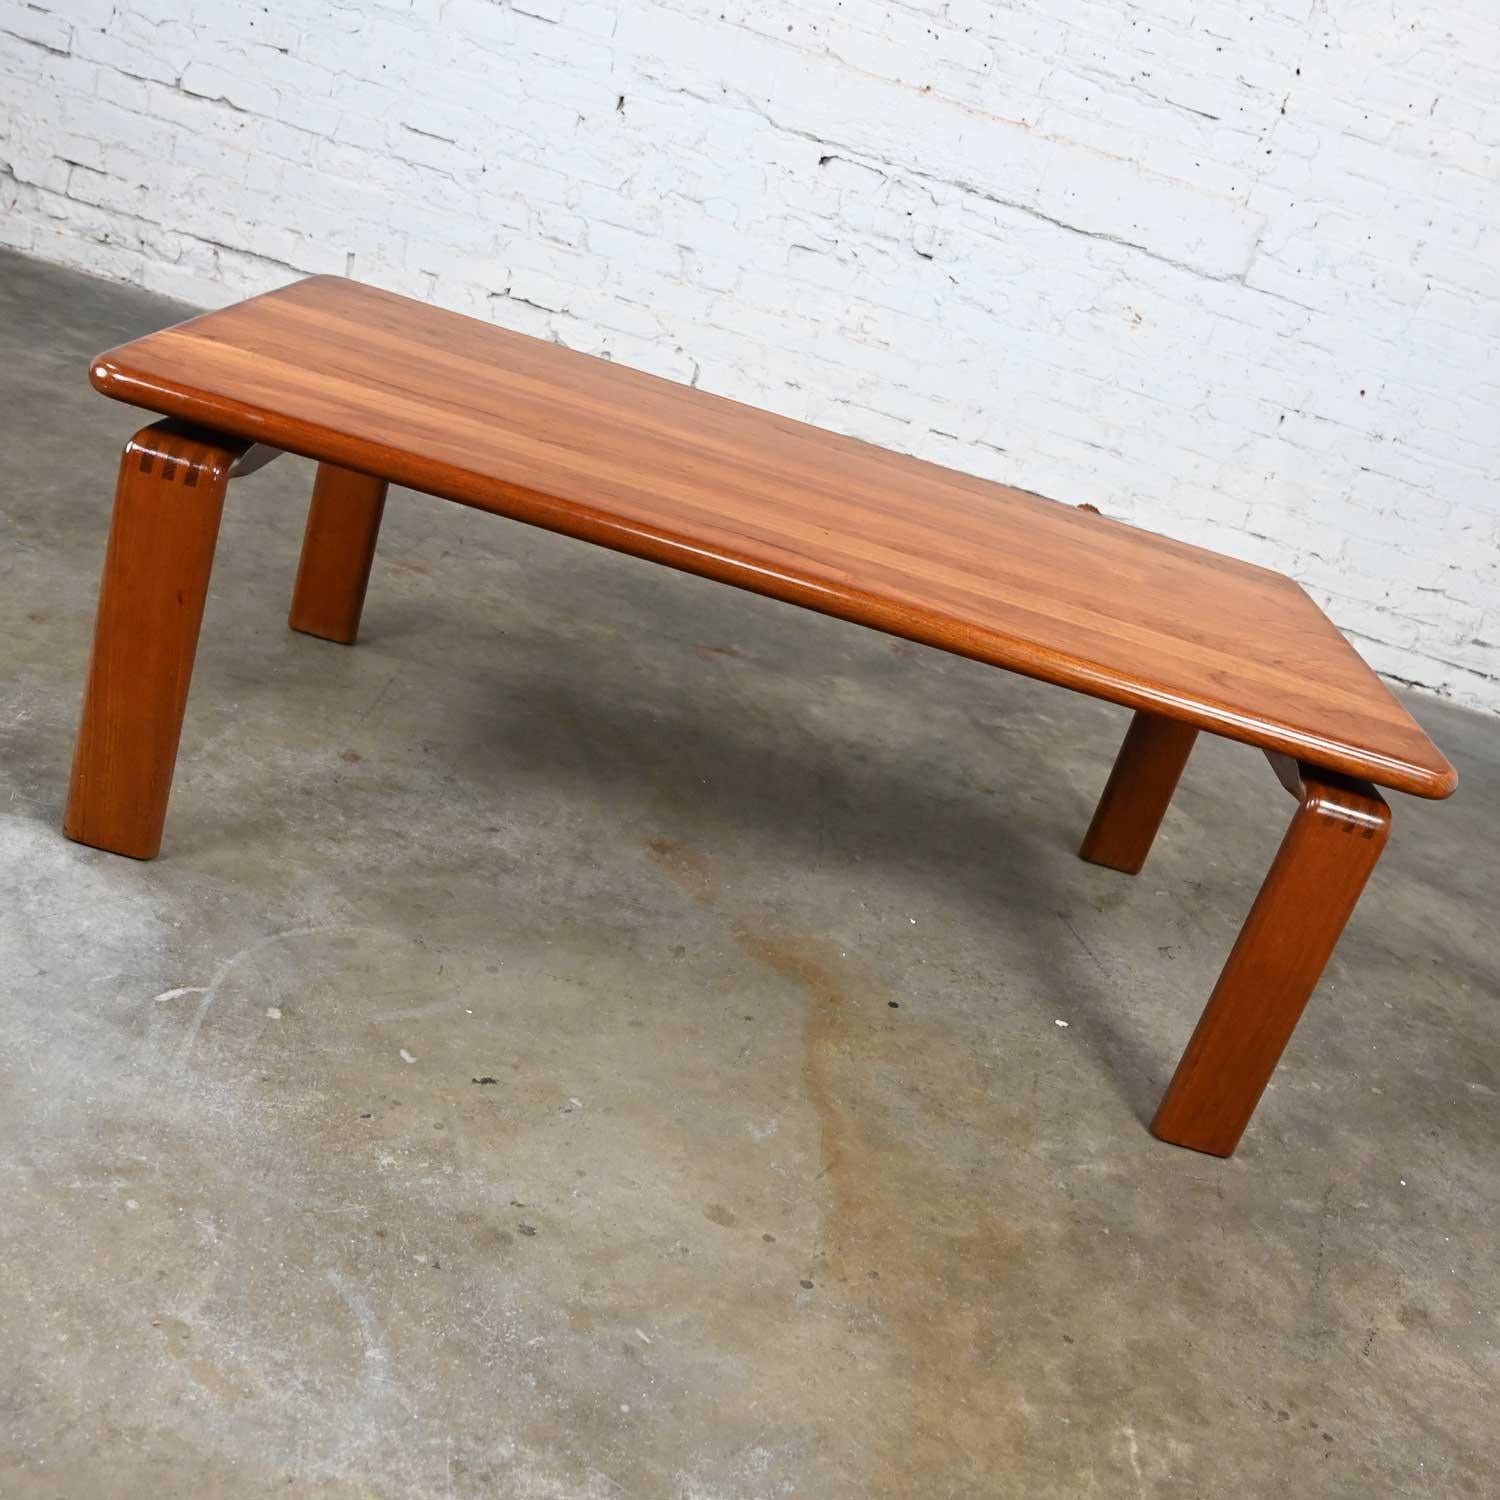 Gorgeous vintage Scandinavian Modern solid teak rectangular coffee table with rounded corners and a glass overlay in the style of Westnofa, Norway. Beautiful condition, keeping in mind that this is vintage and not new so will have signs of use and